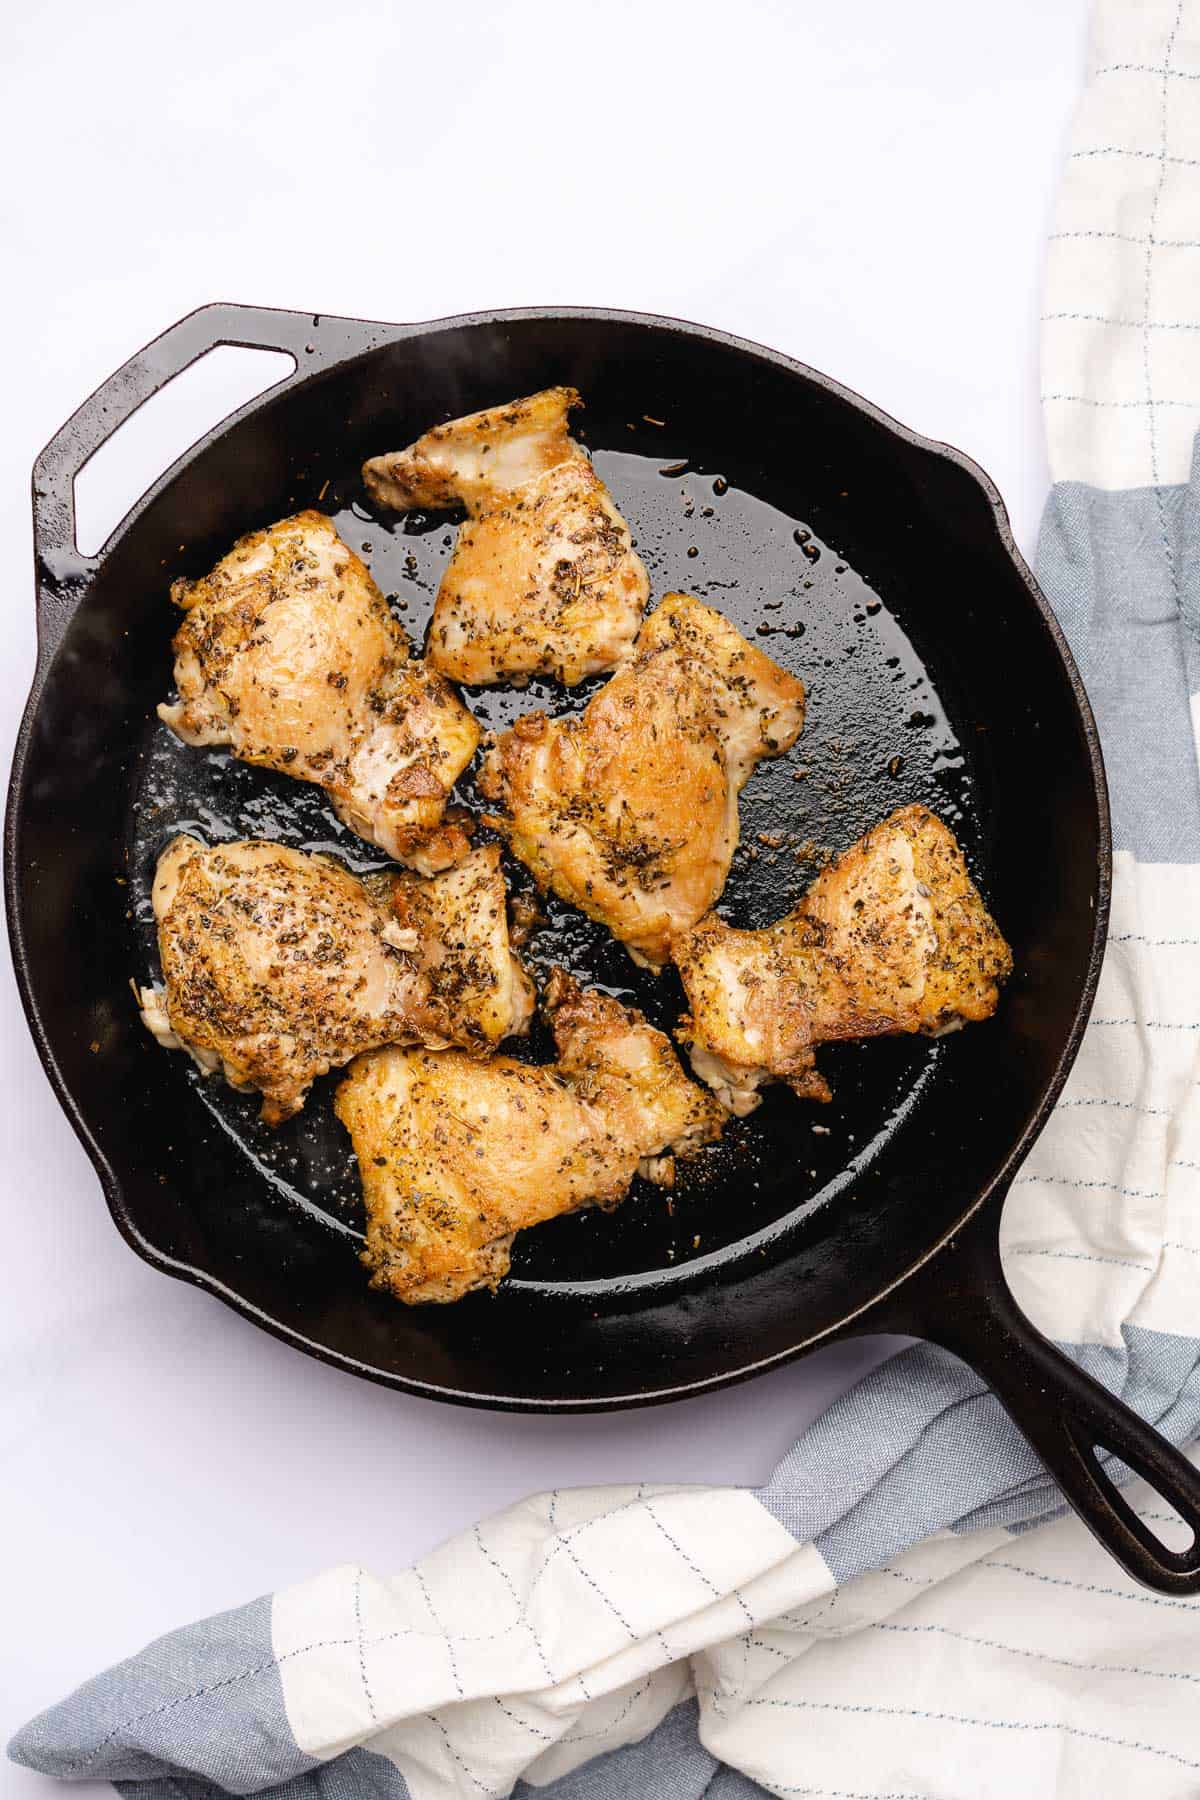 seared and seasoned chicken thighs in a cast iron skillet